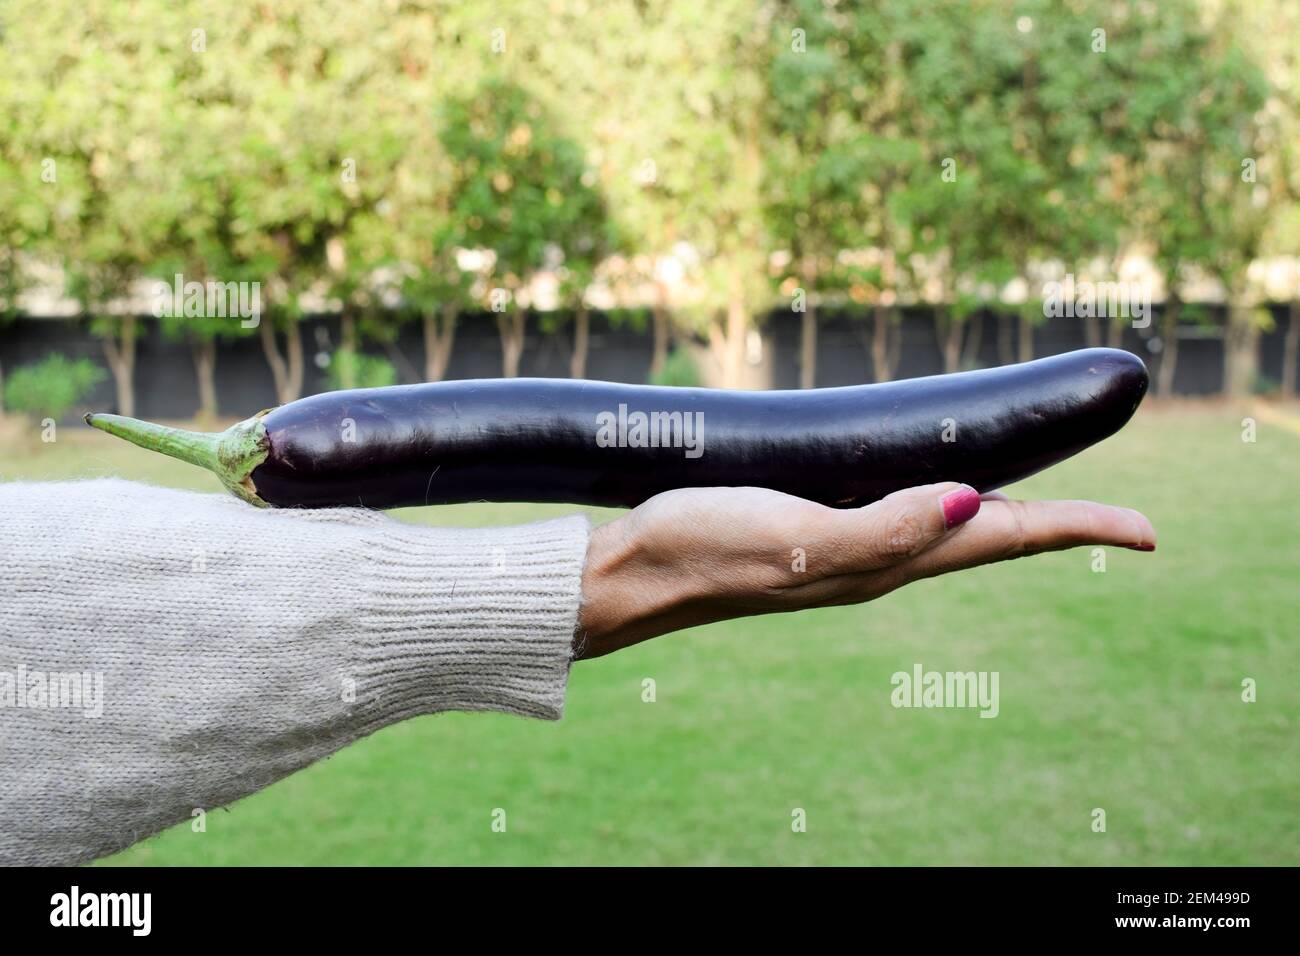 Very long dark purple thin slender Eggplant or aubergine or brinjal Indian vegetable homegrown vegetable gron organically and harvested. Woman girl ho Stock Photo